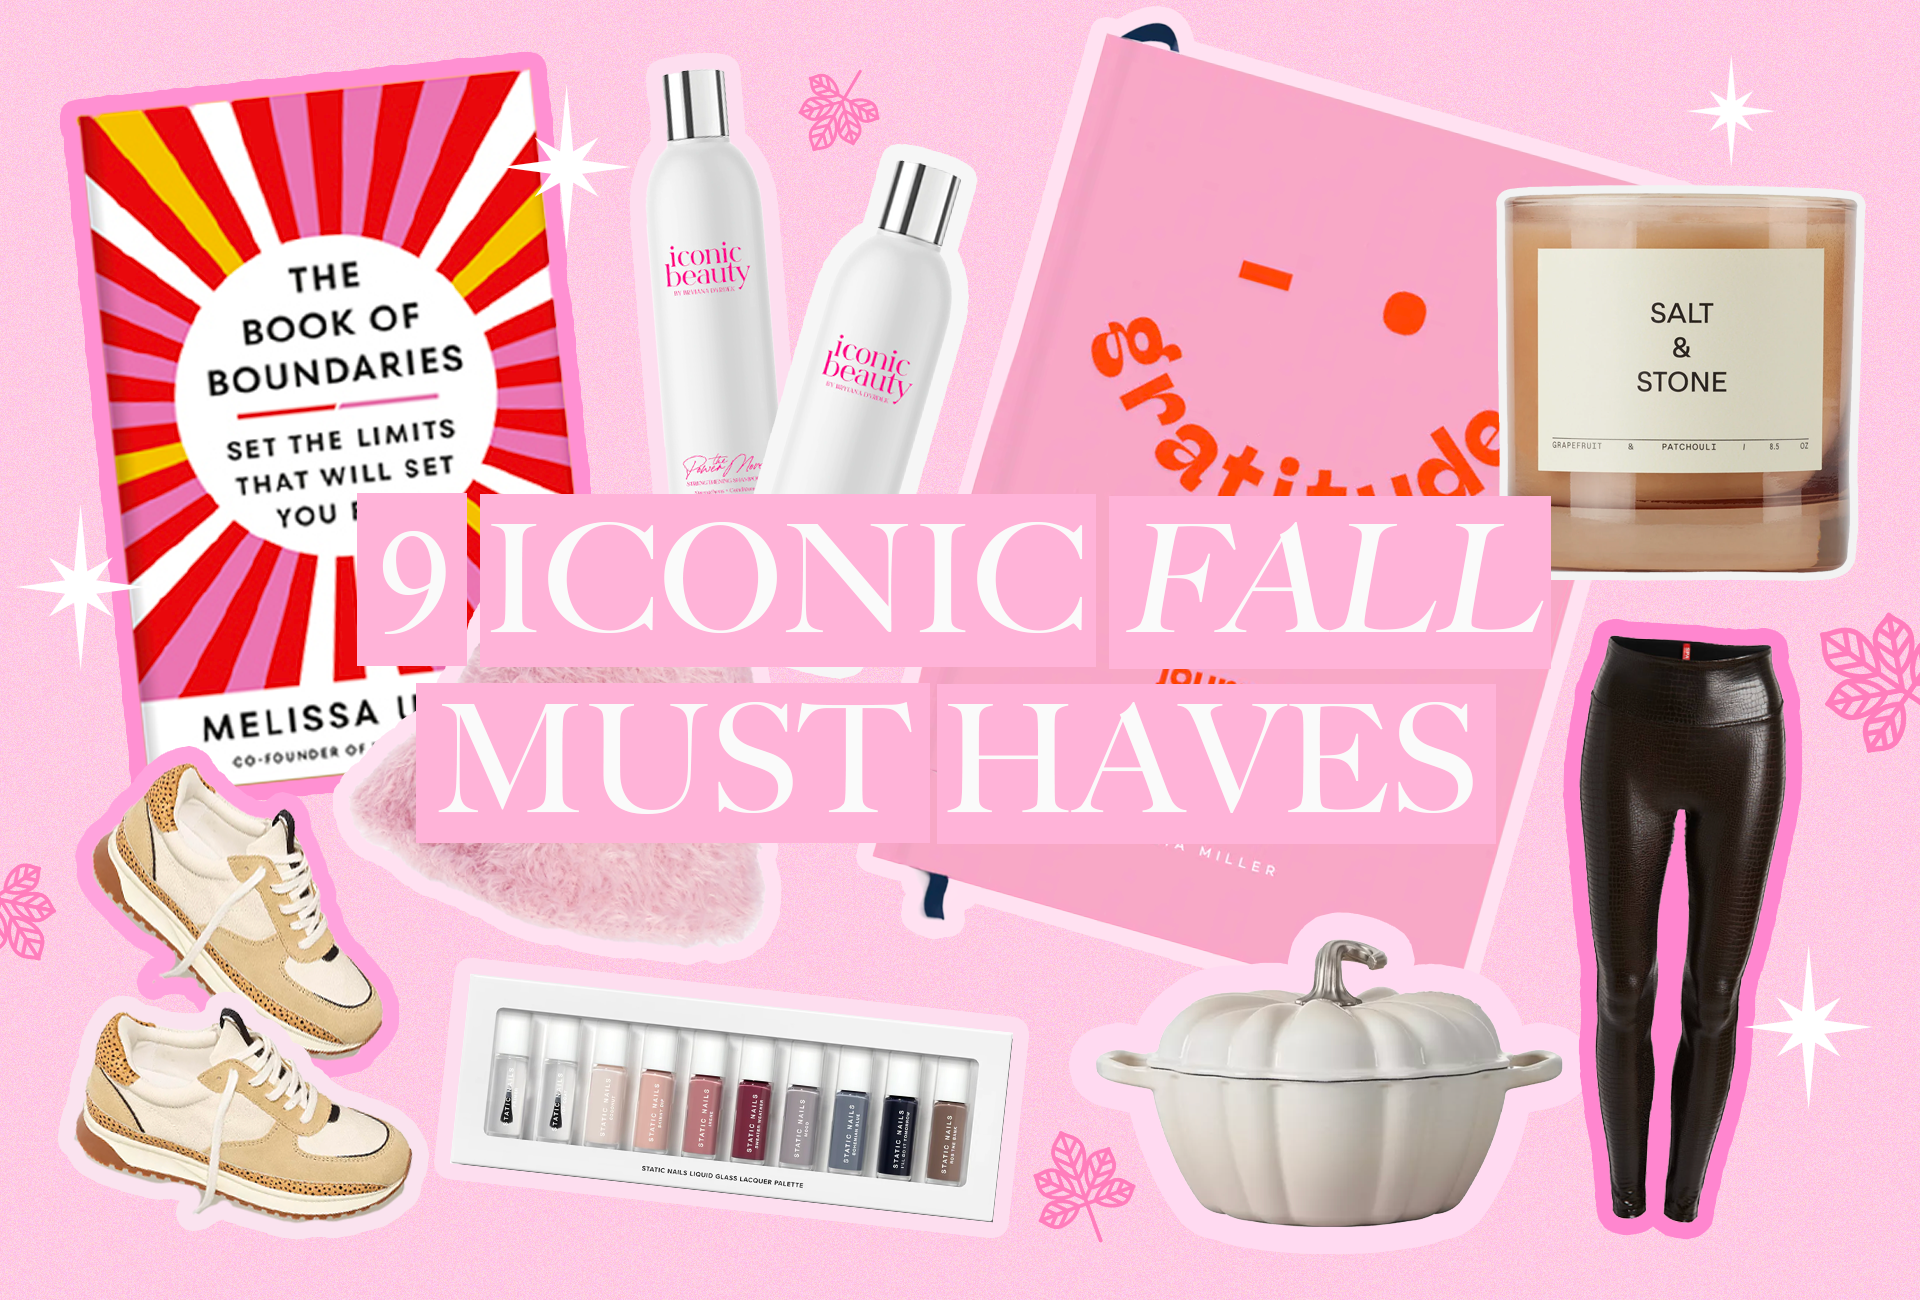 9 Iconic Fall Must-Haves